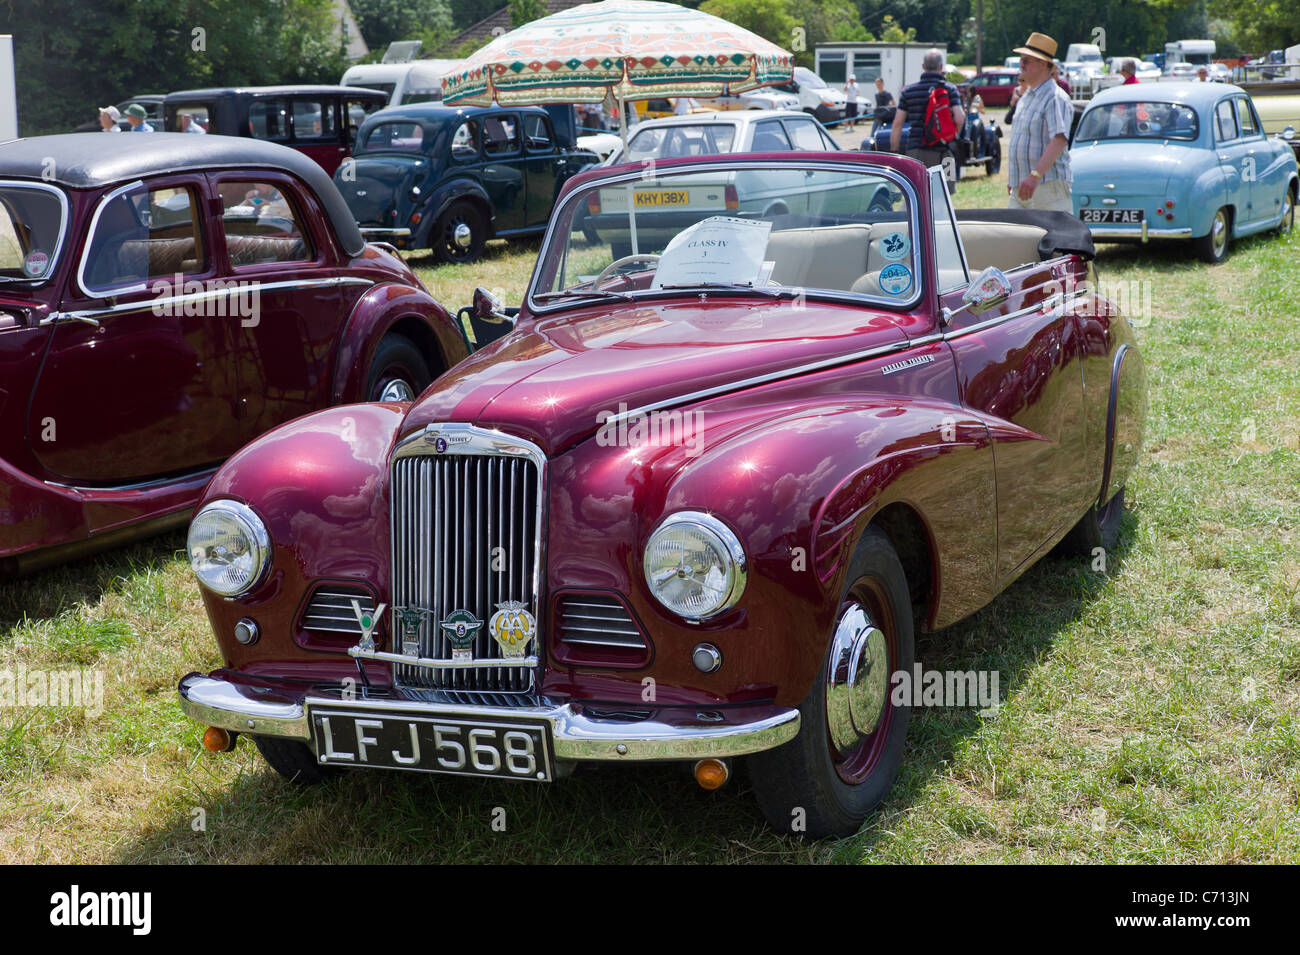 1950s Sunbeam Talbot 90 sports coupé at an English show 2011 Stock Photo